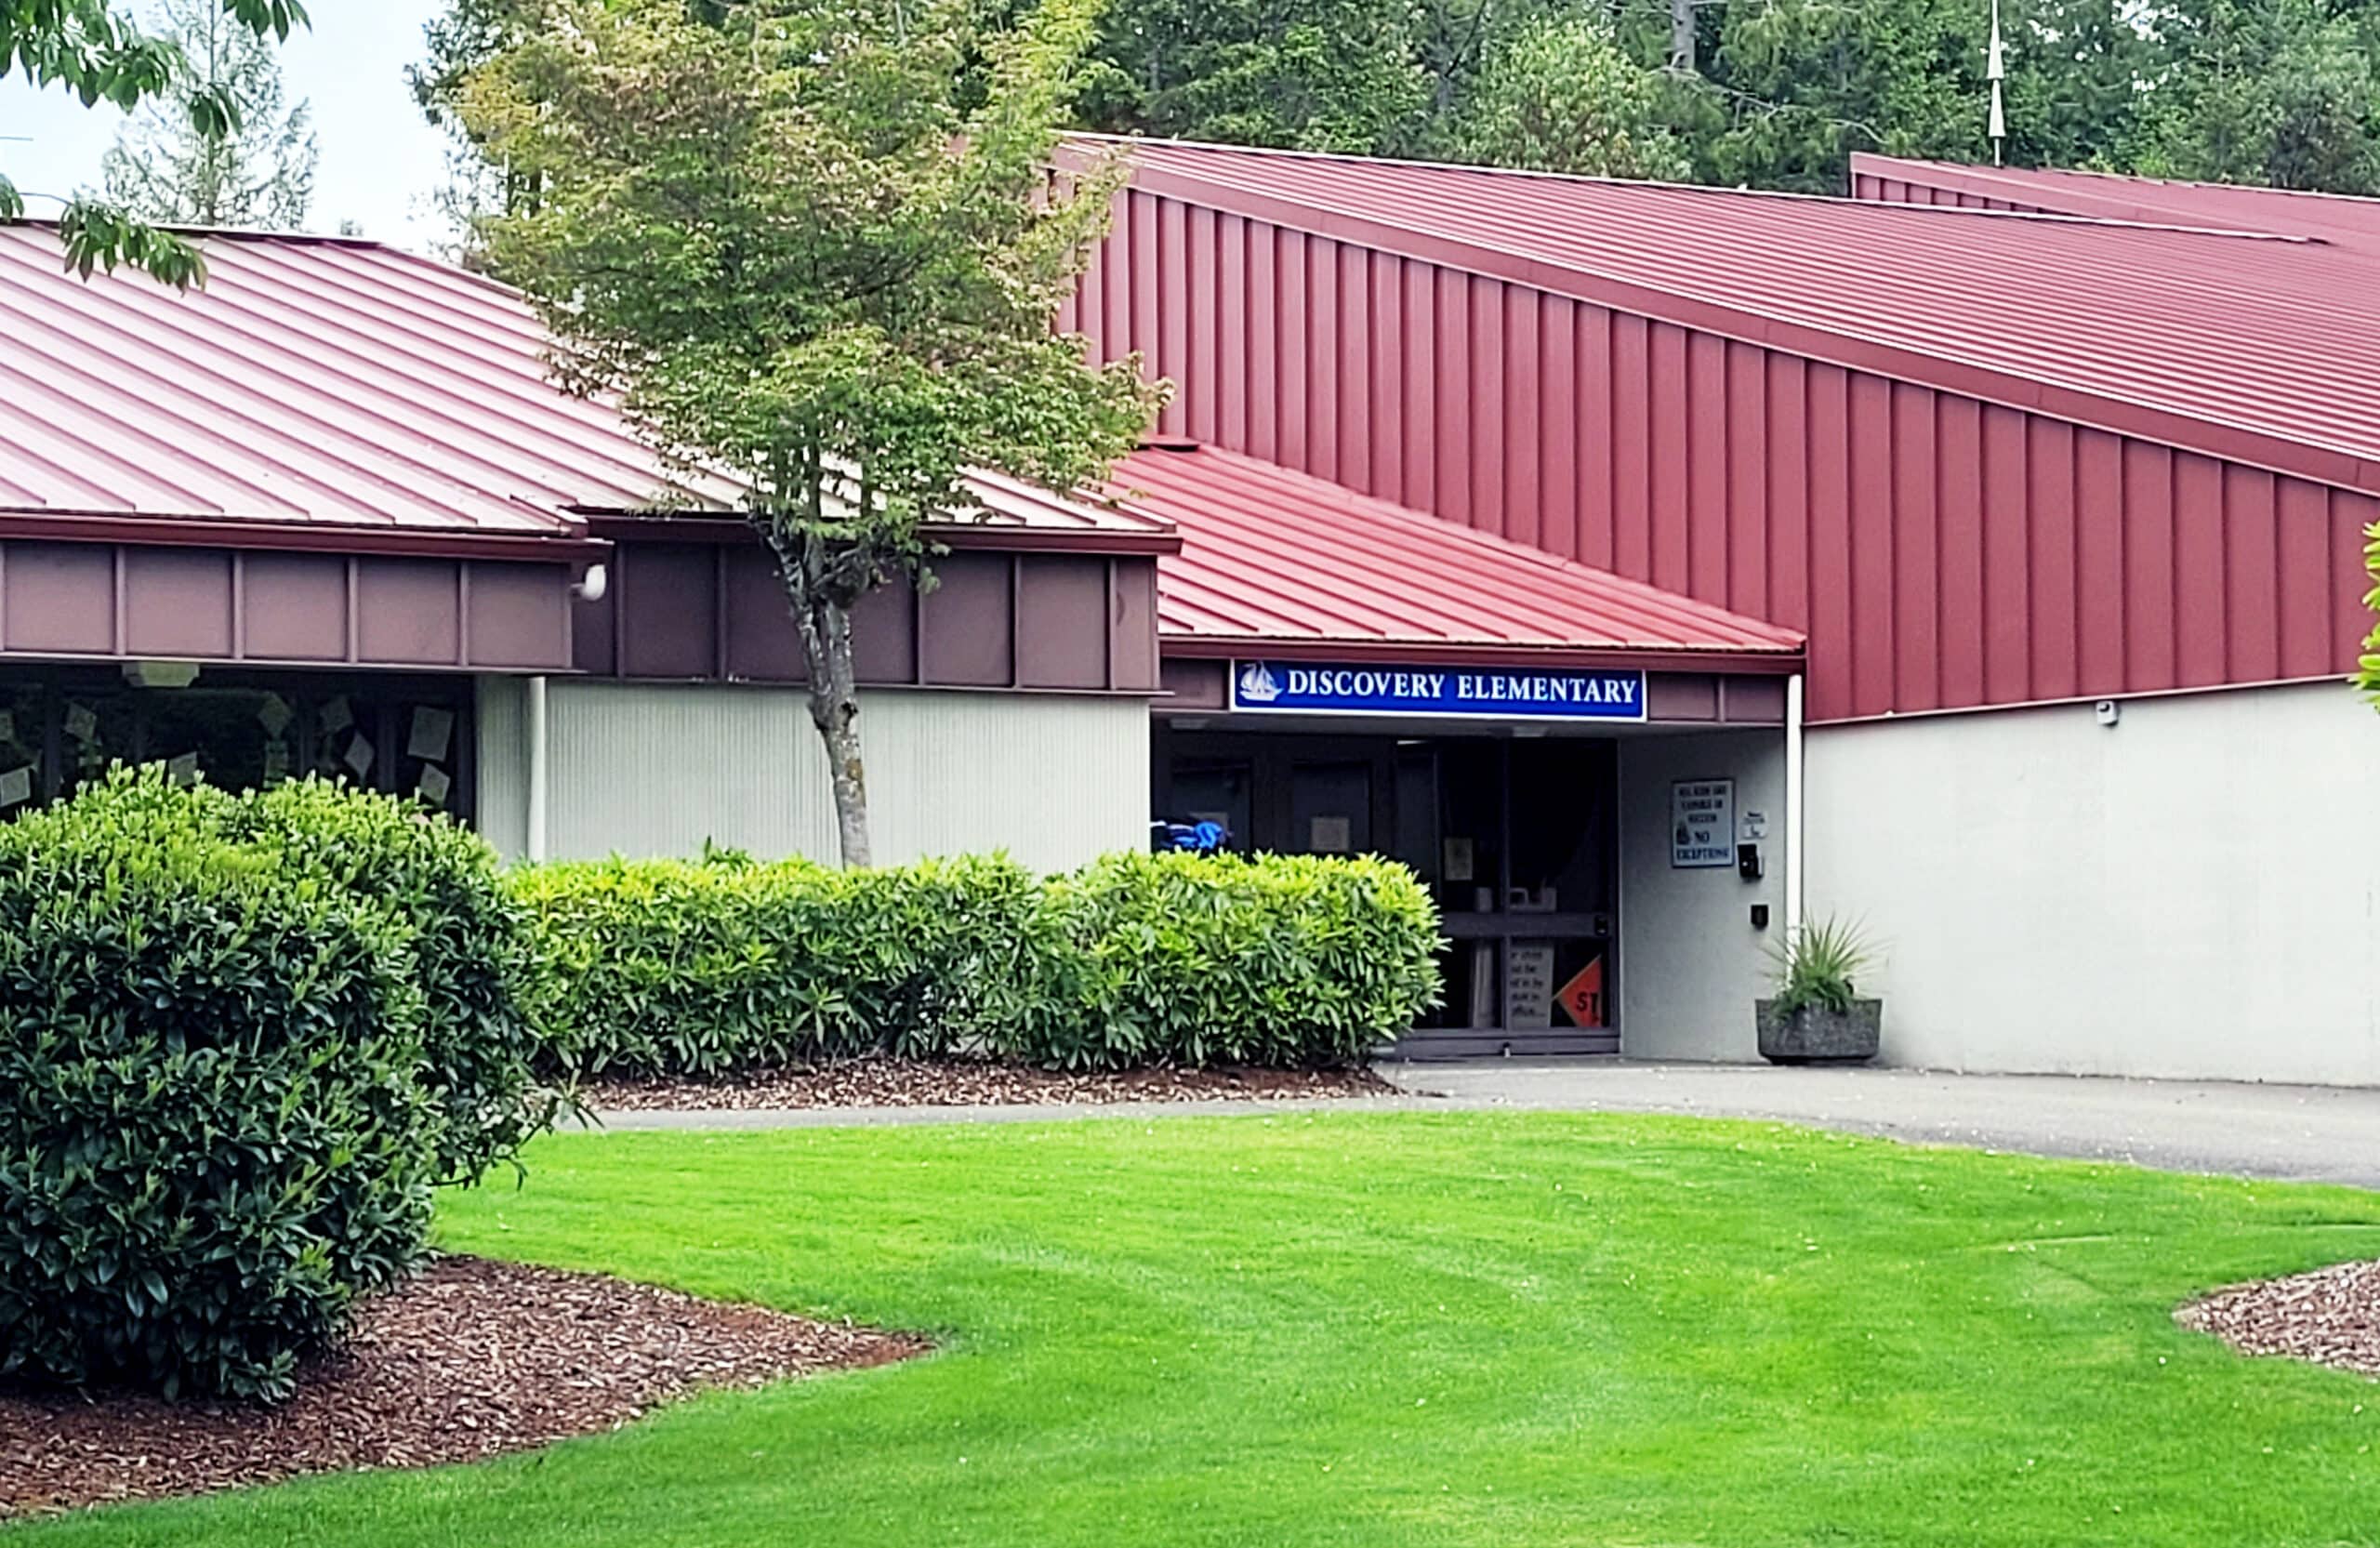 The exterior of Discovery Elementary in Gig Harbor.